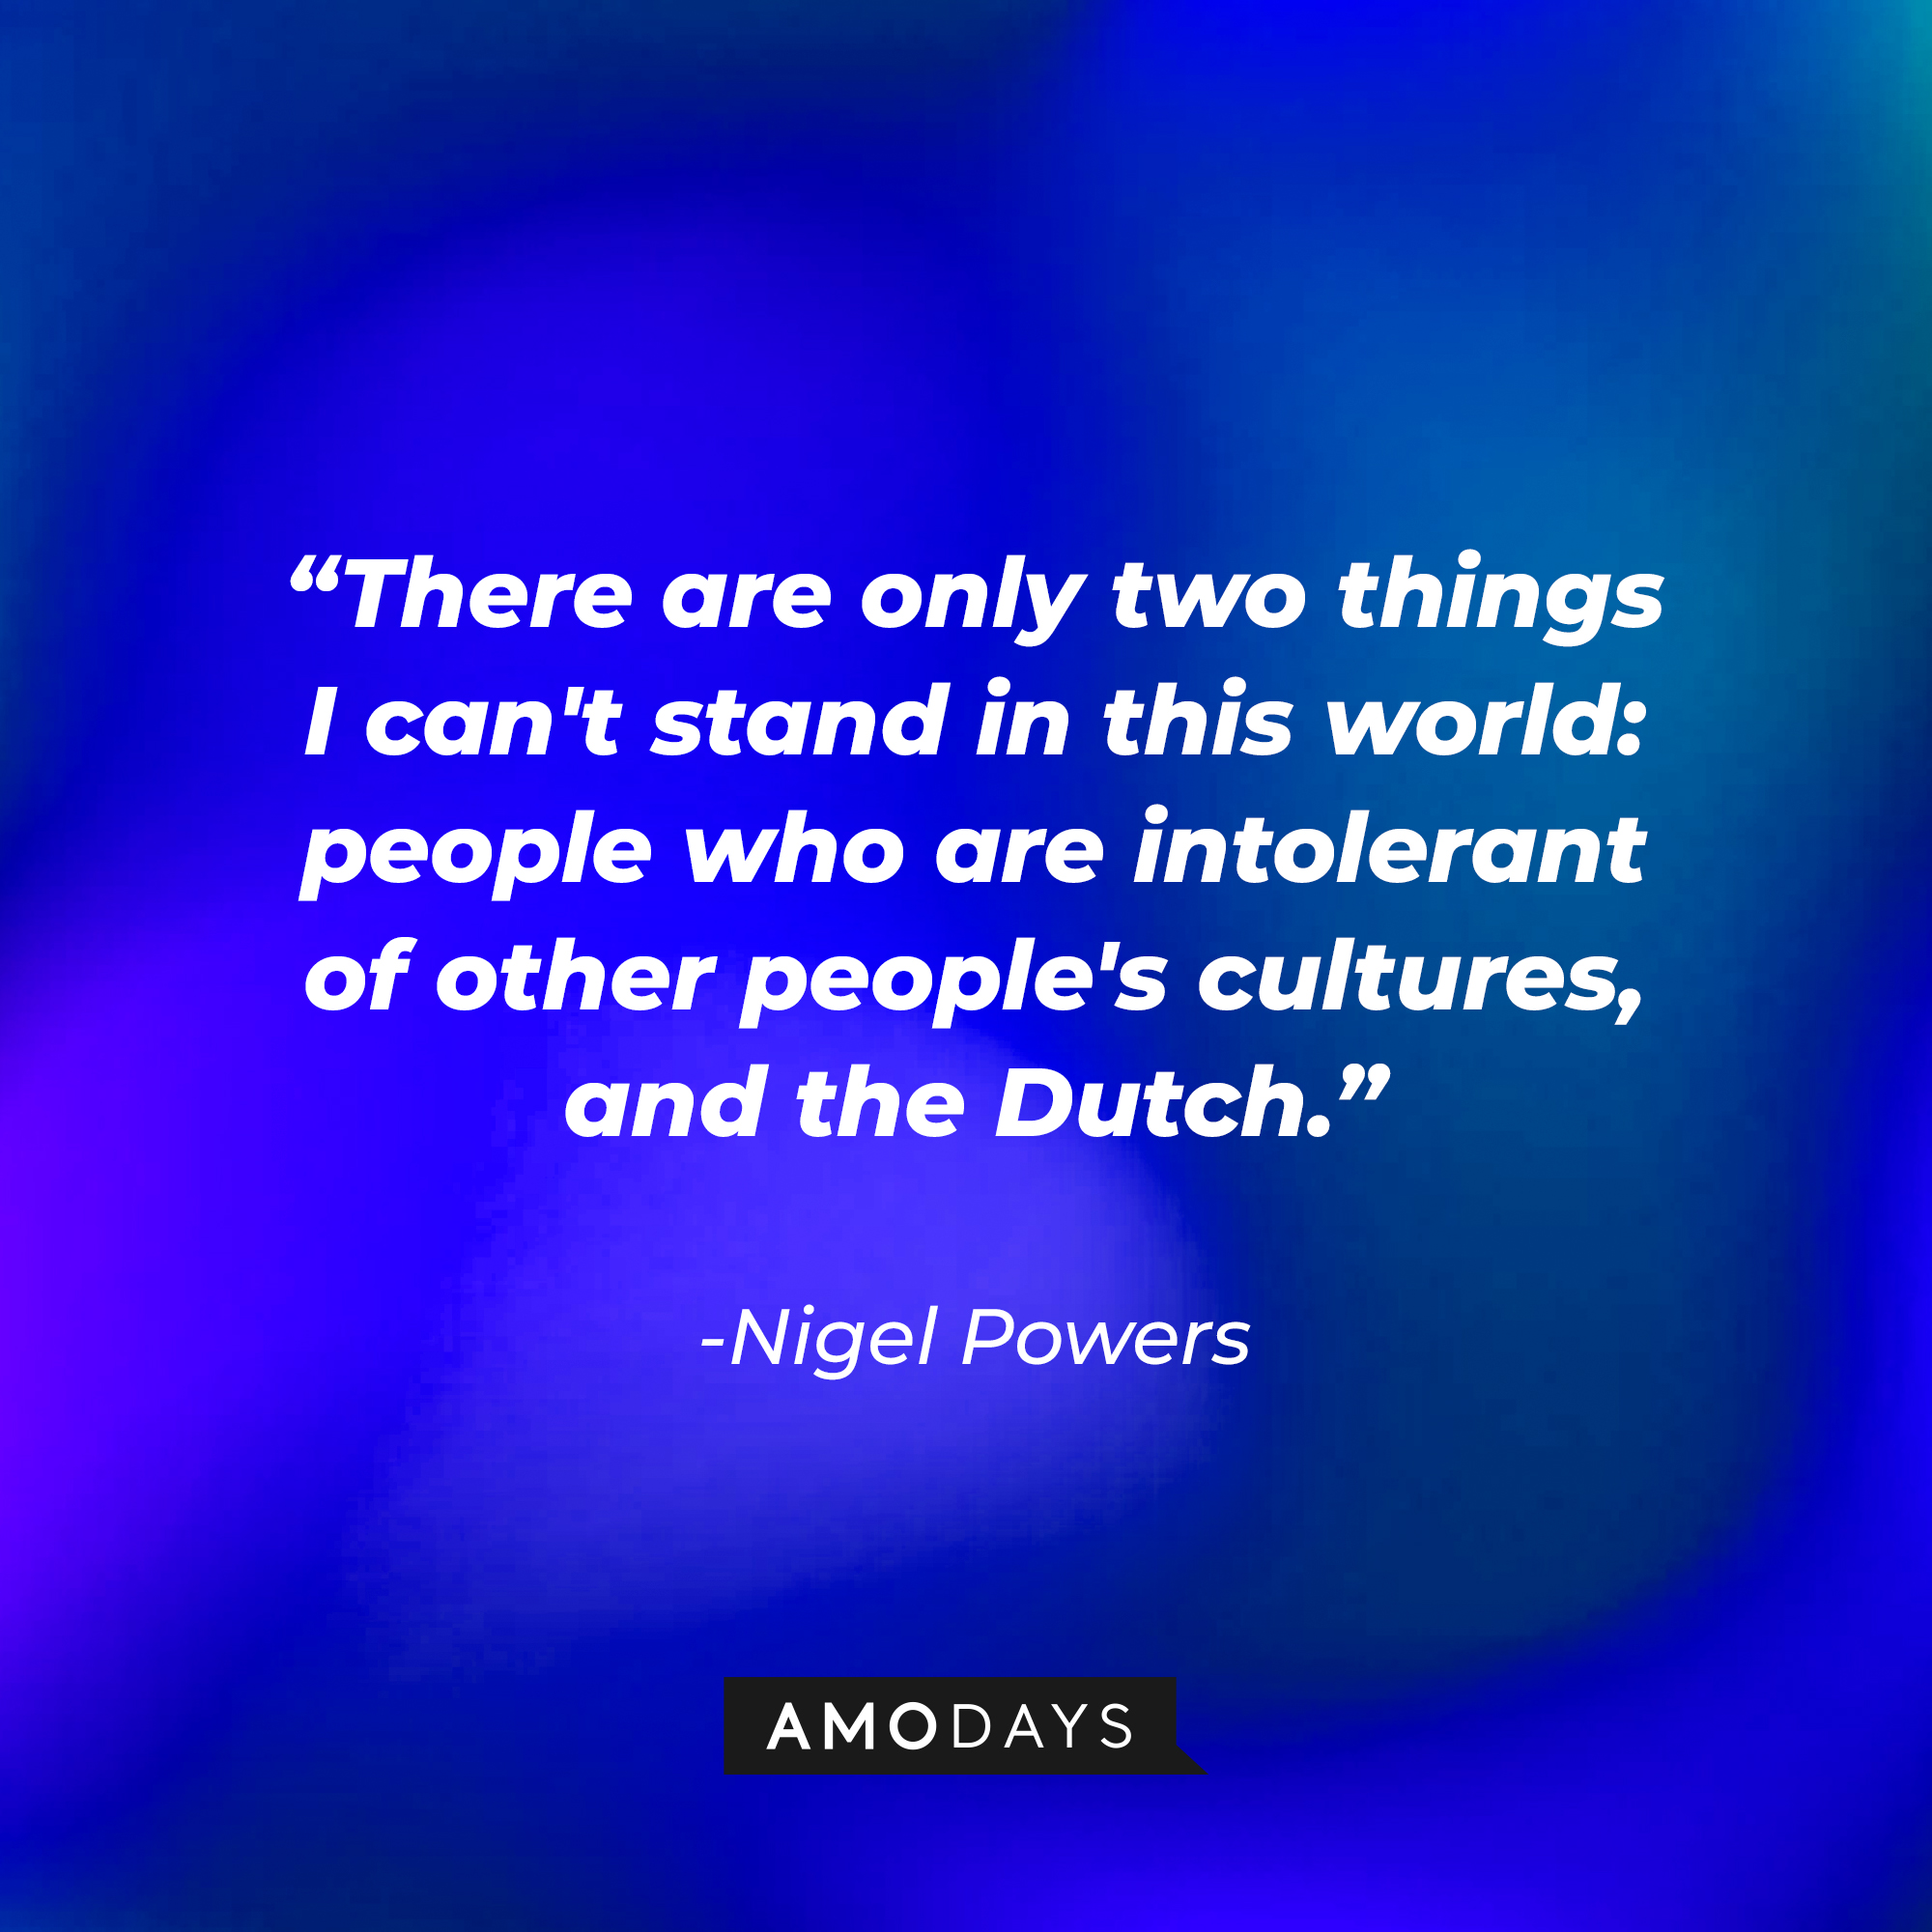 Nigel Power's quote: “There are only two things I can't stand in this world: people who are intolerant of other people's cultures, and the Dutch.” | Source: Amodays